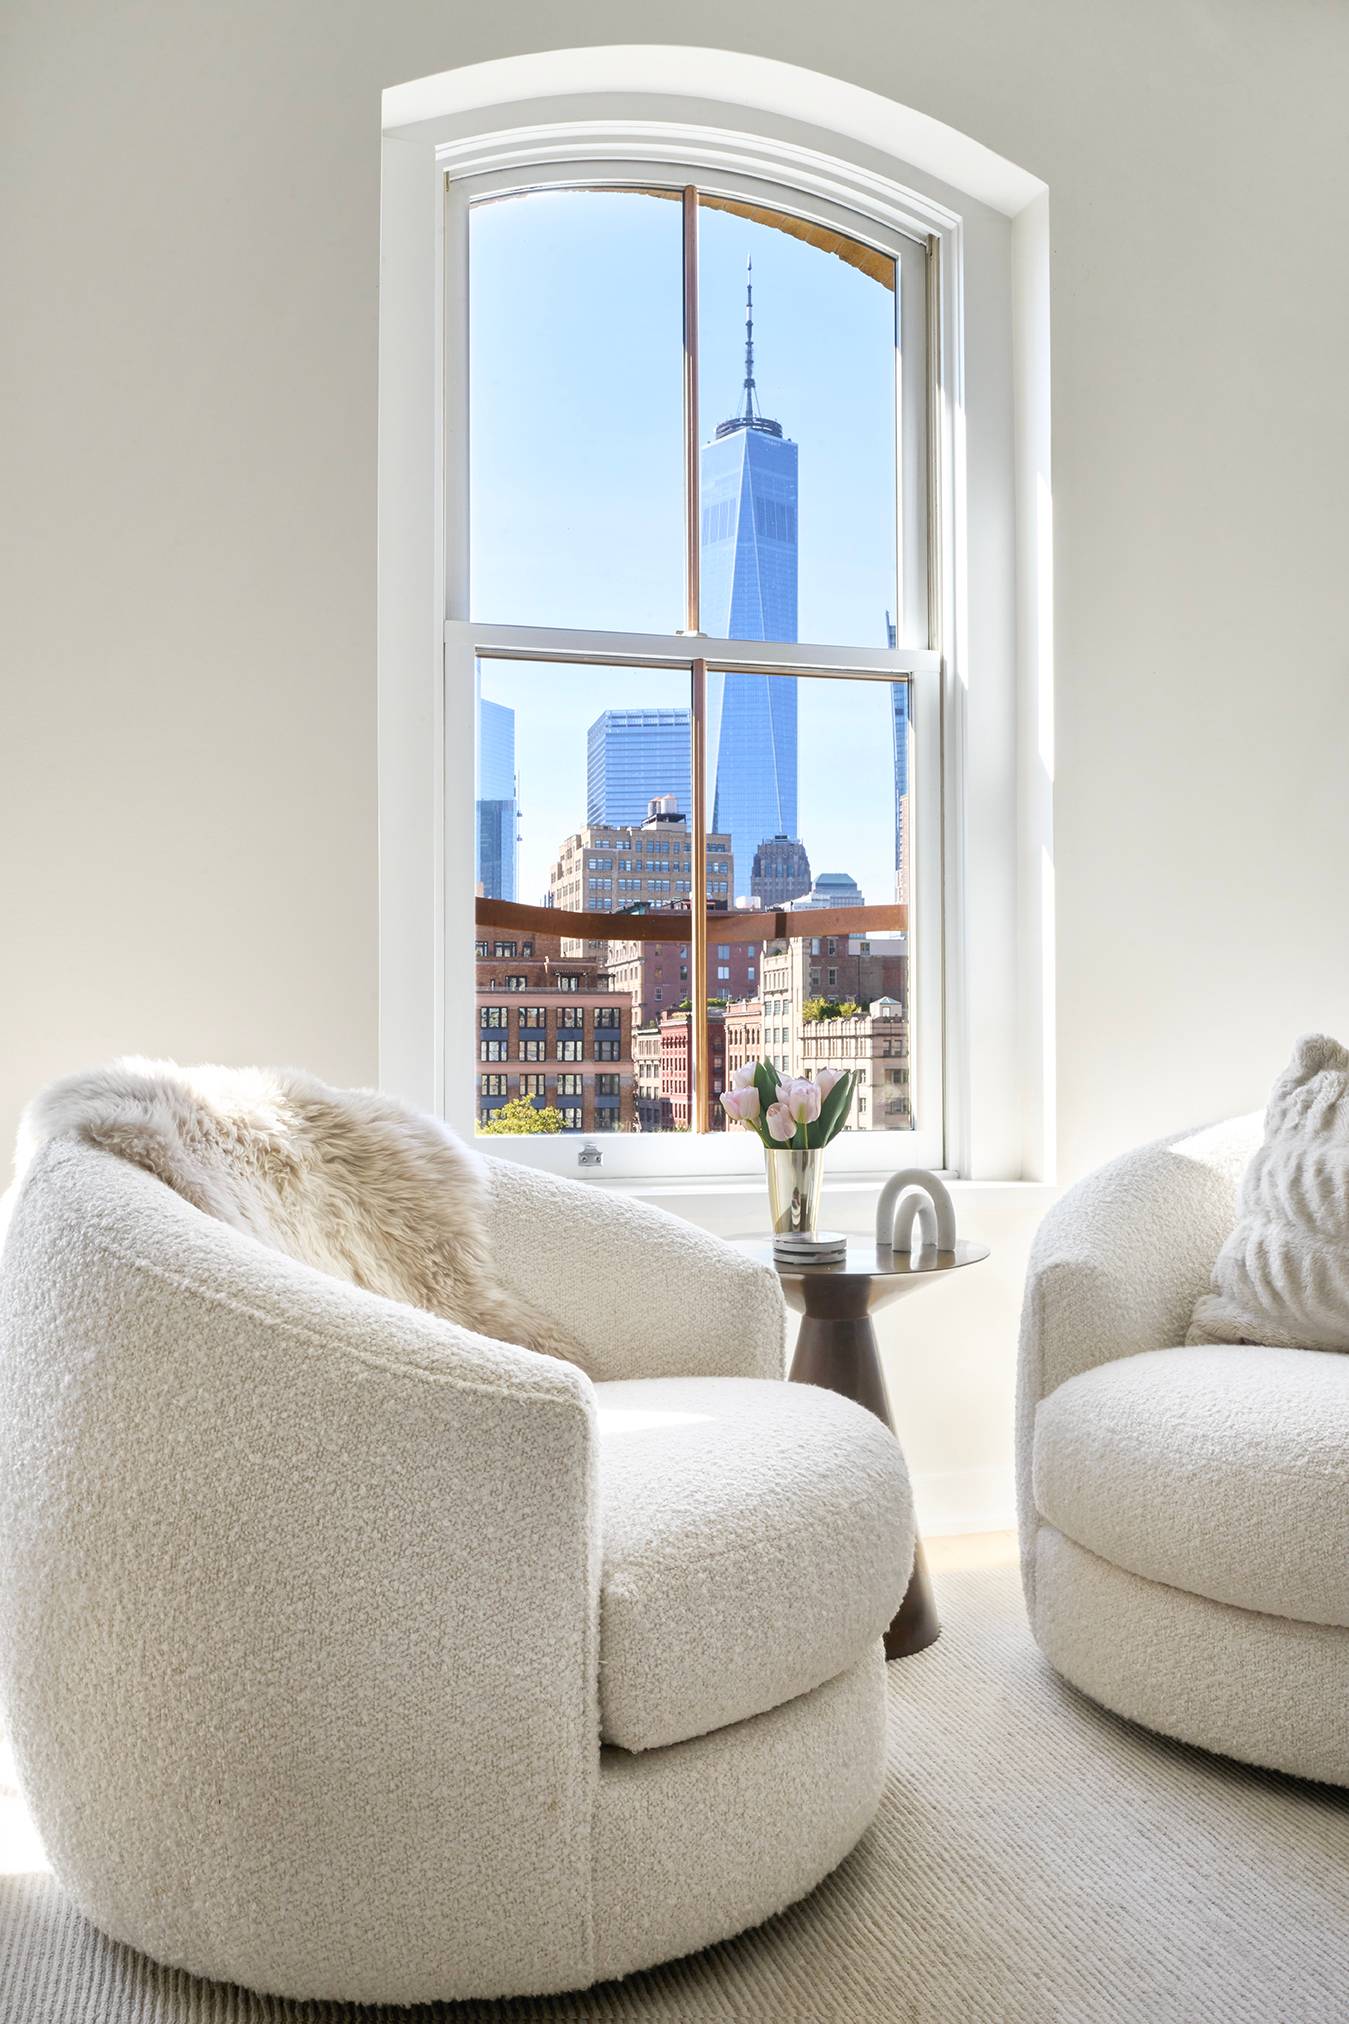 Extraordinary true loft living awaits in this expansive three bedroom Tribeca showplace featuring designer interiors and a massive private terrace in a historic full service condominium with in building parking ...